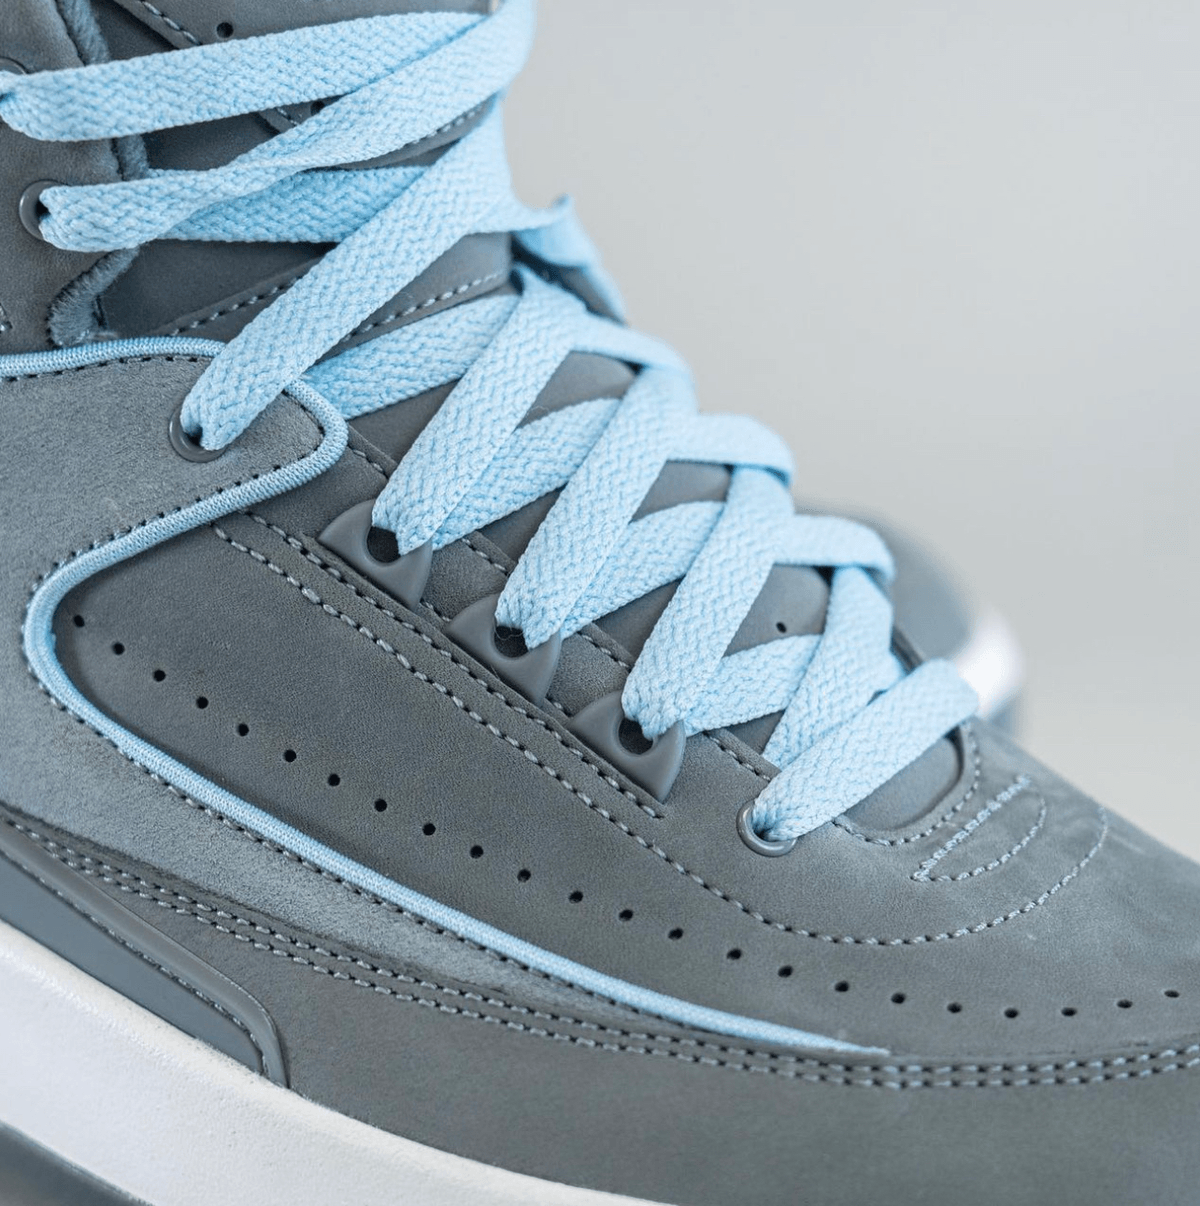 First Look At The Women’s Exclusive Air Jordan 2 Cool Grey